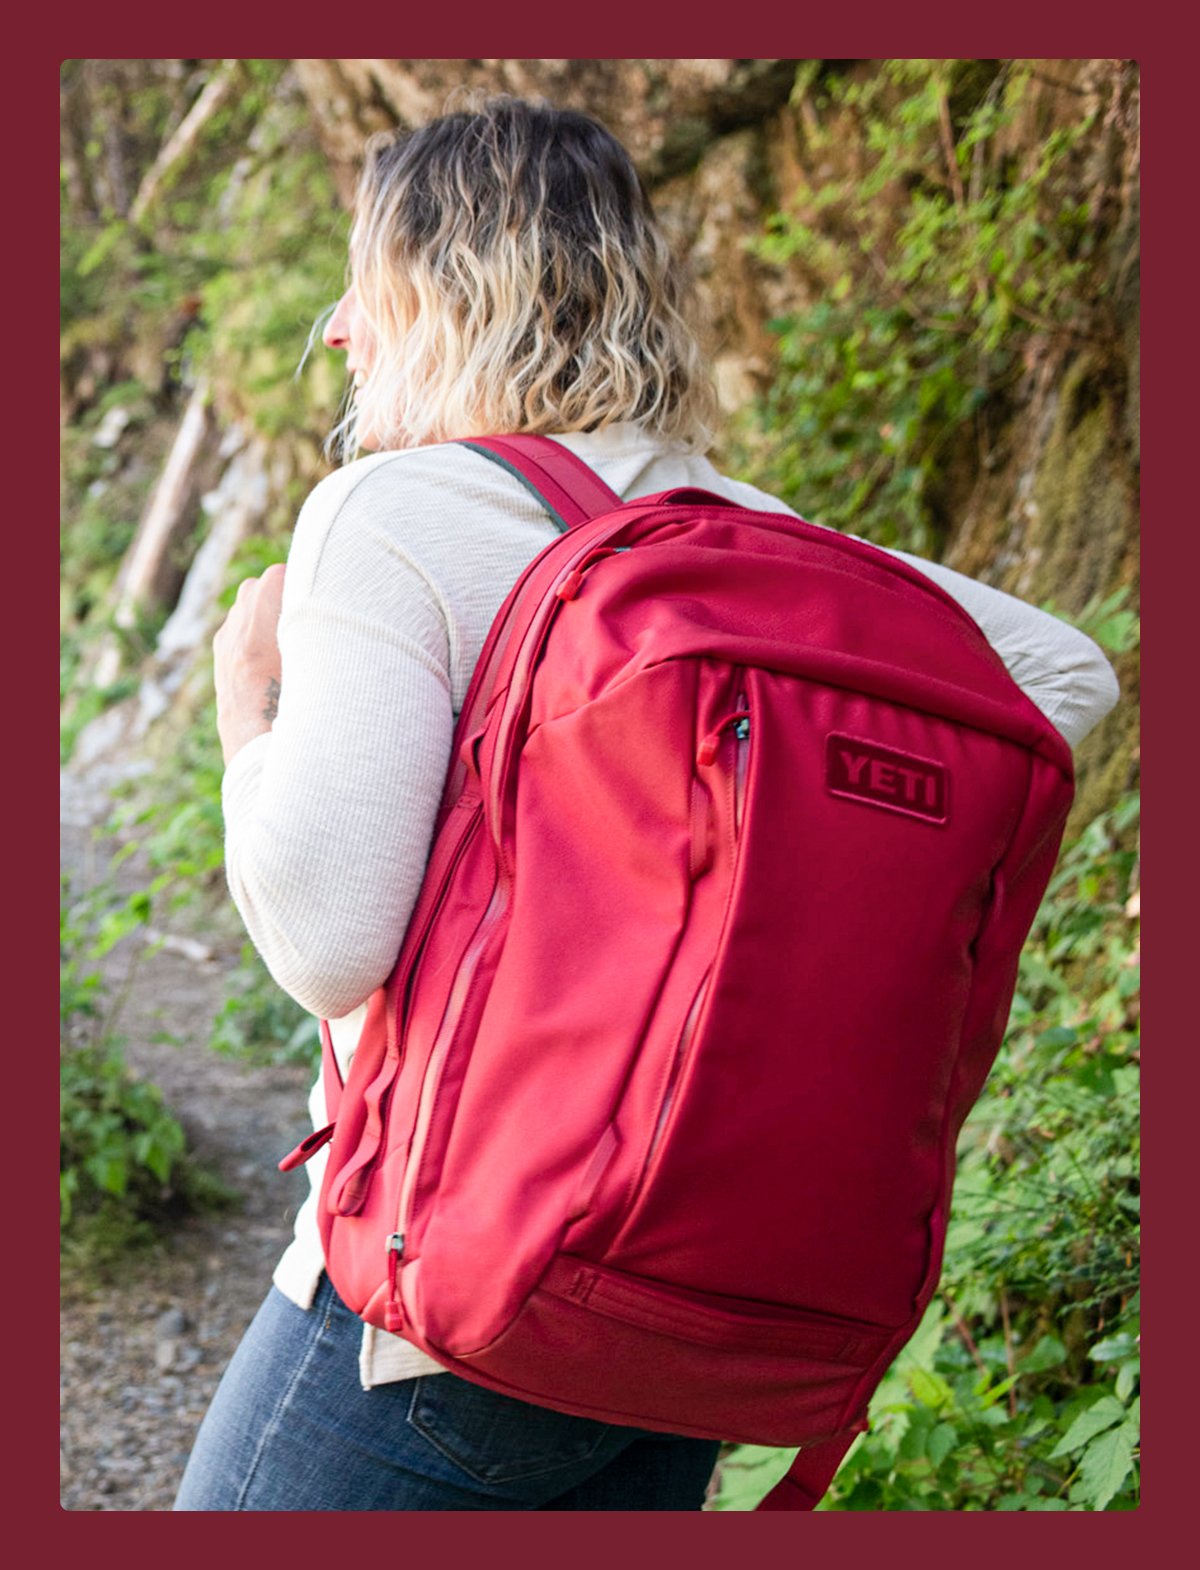 YETI: Our Bags Now Come in Harvest Red. | Milled